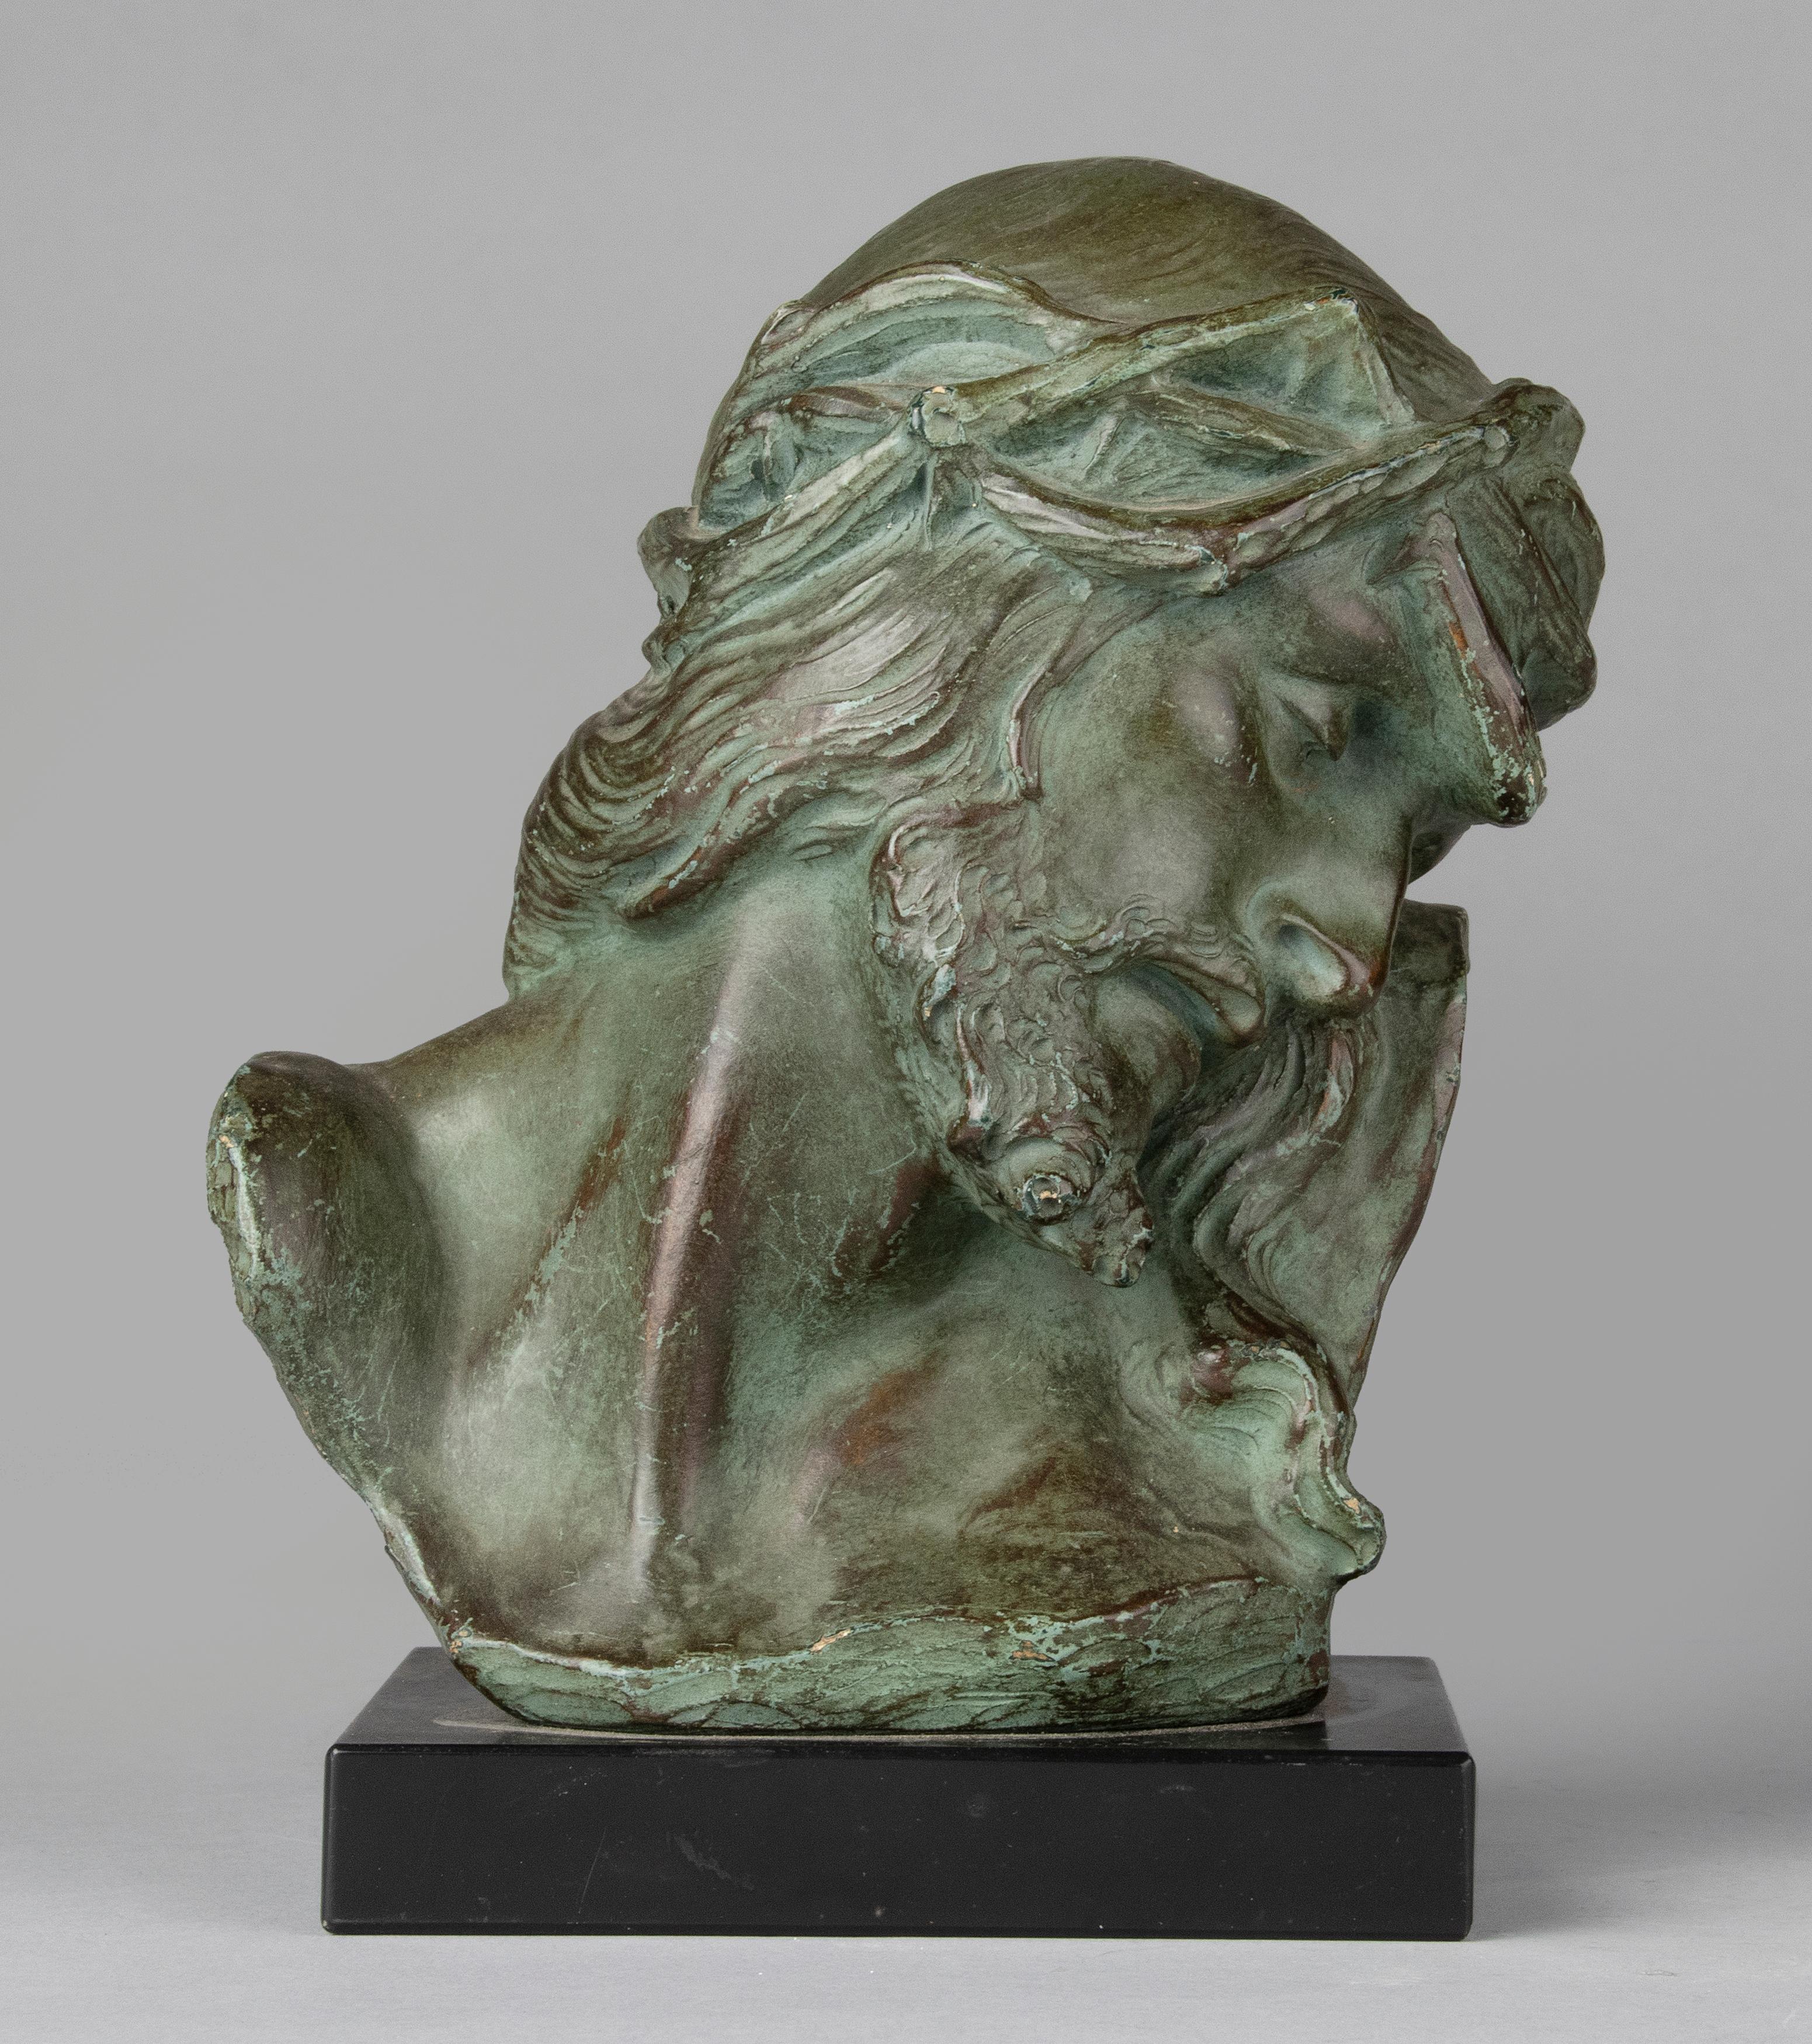 Beautiful old bust depicting Jesus Christ suffering. The statue is made of plaster, patinated in a green bronze color. The statue is fixed on a black marble base. The statue is marked on the back. Parentani is a well-known Belgian artist who was